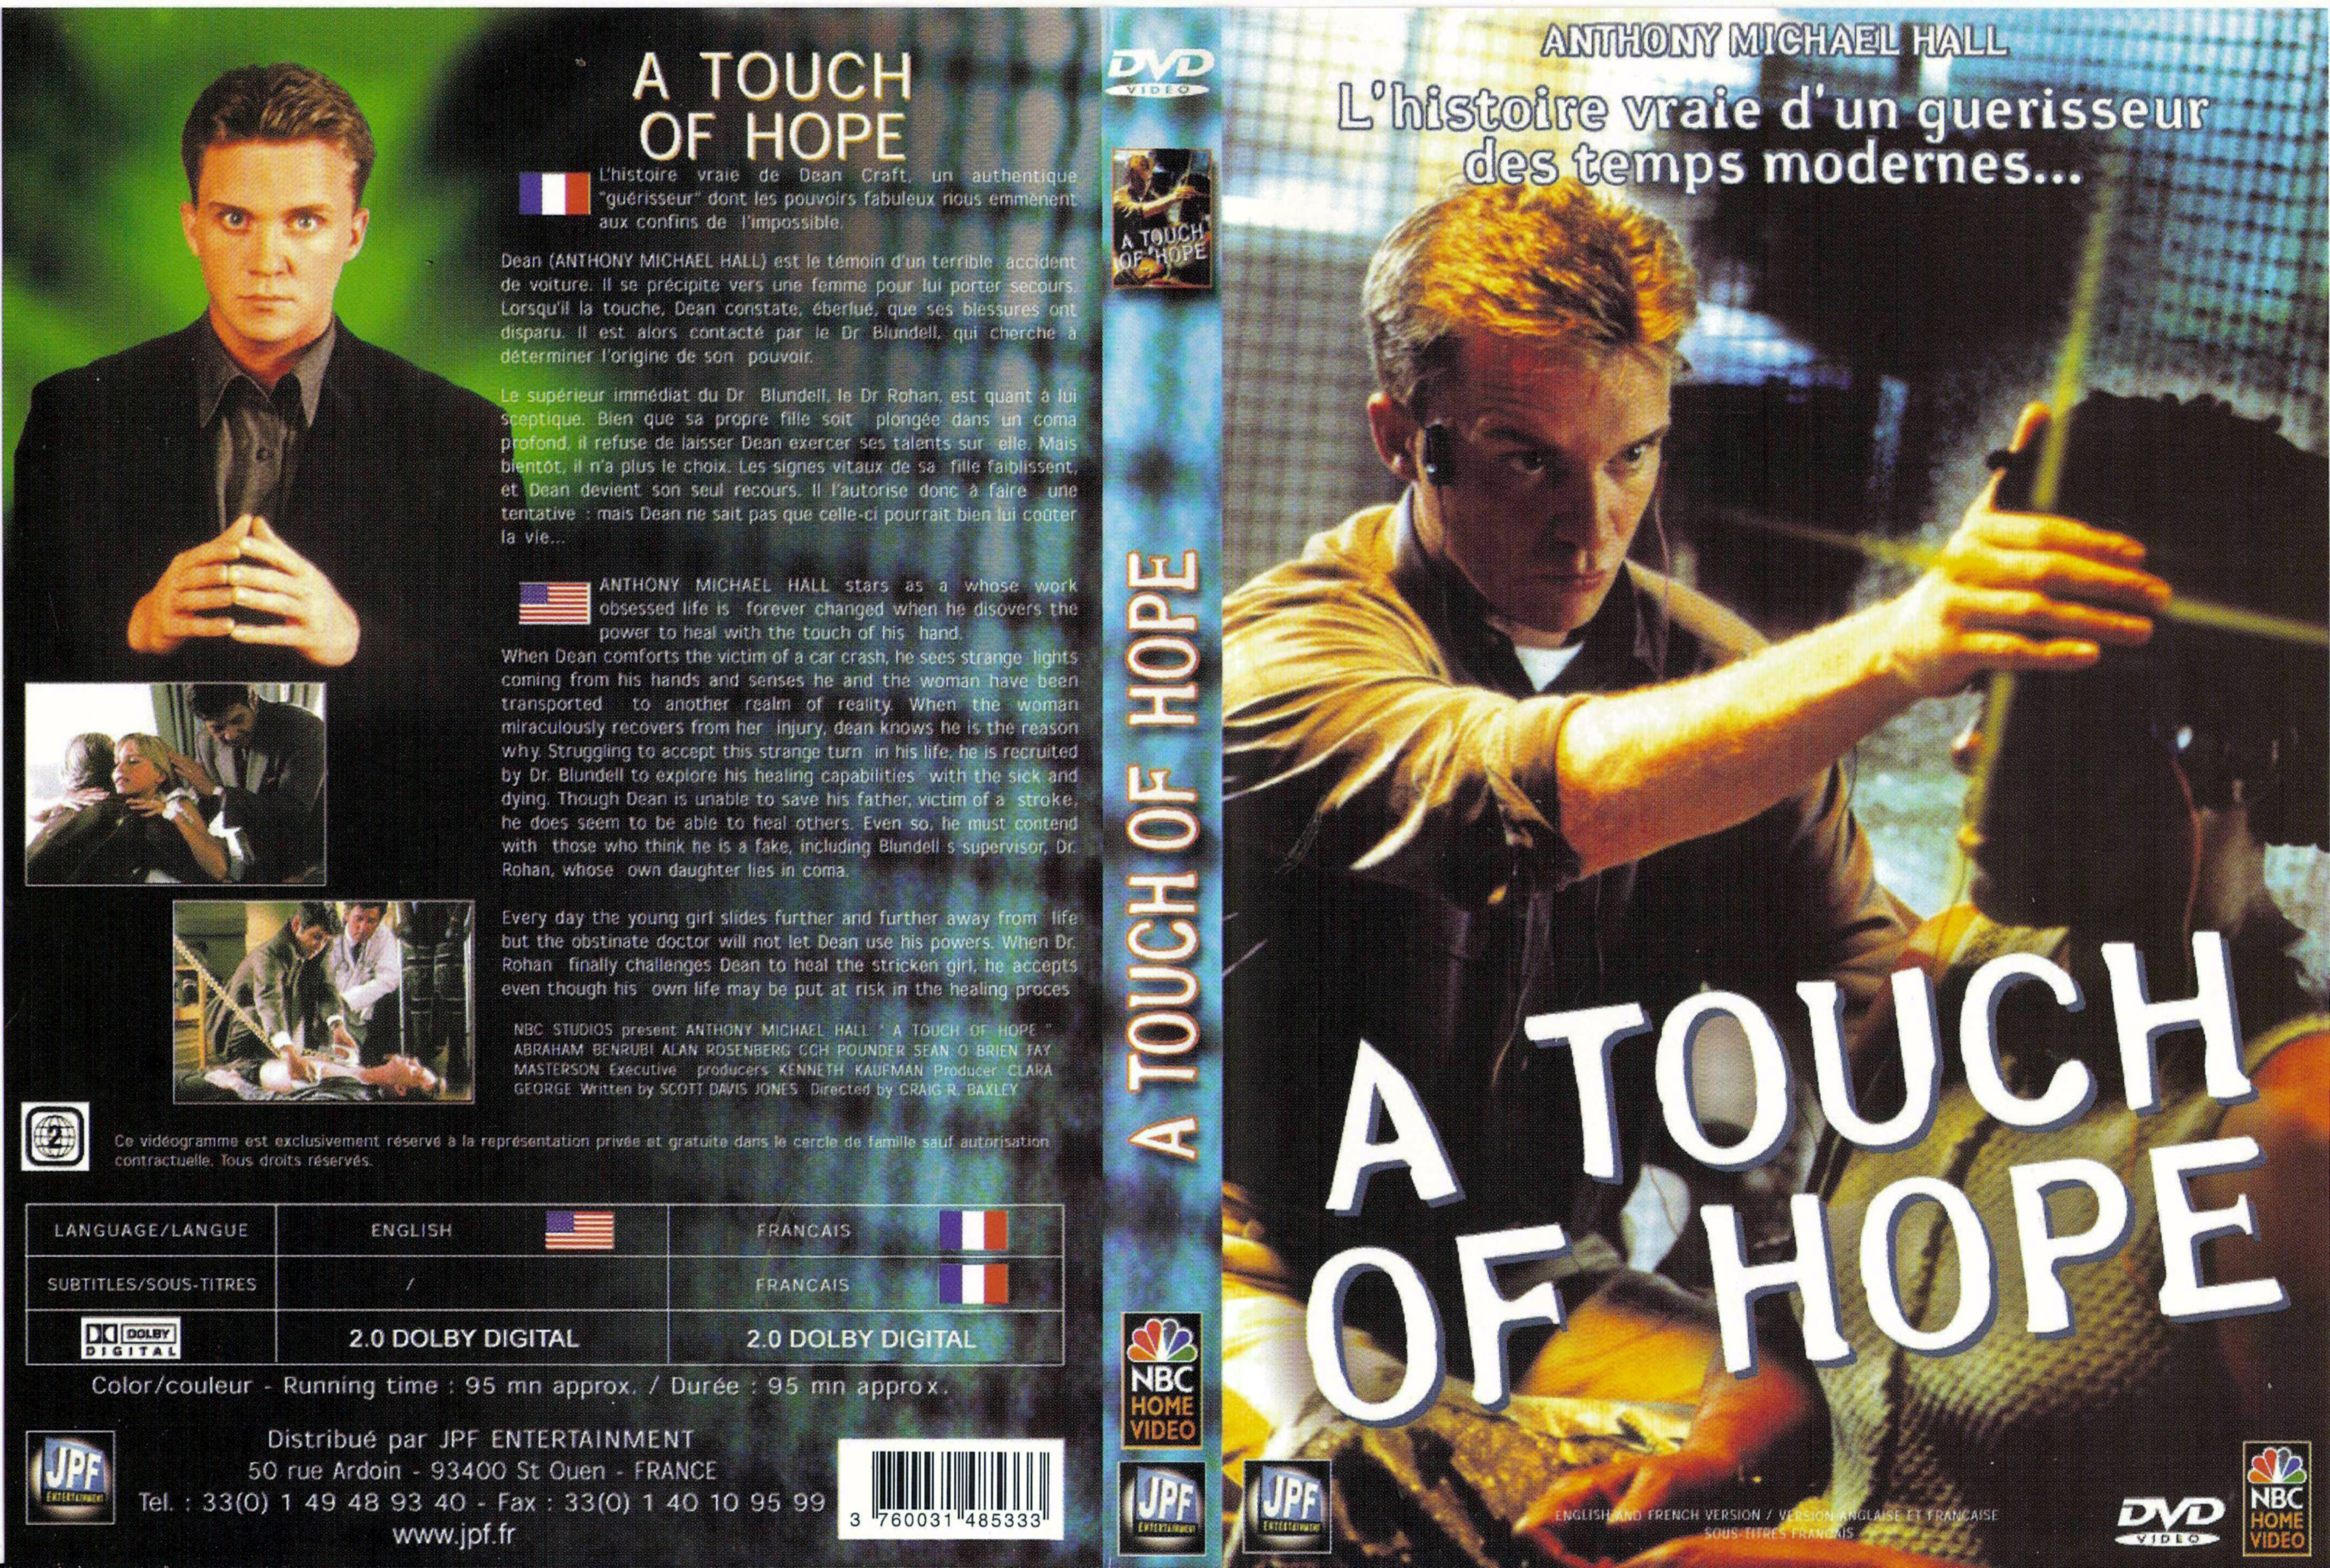 Jaquette DVD A touch of hope